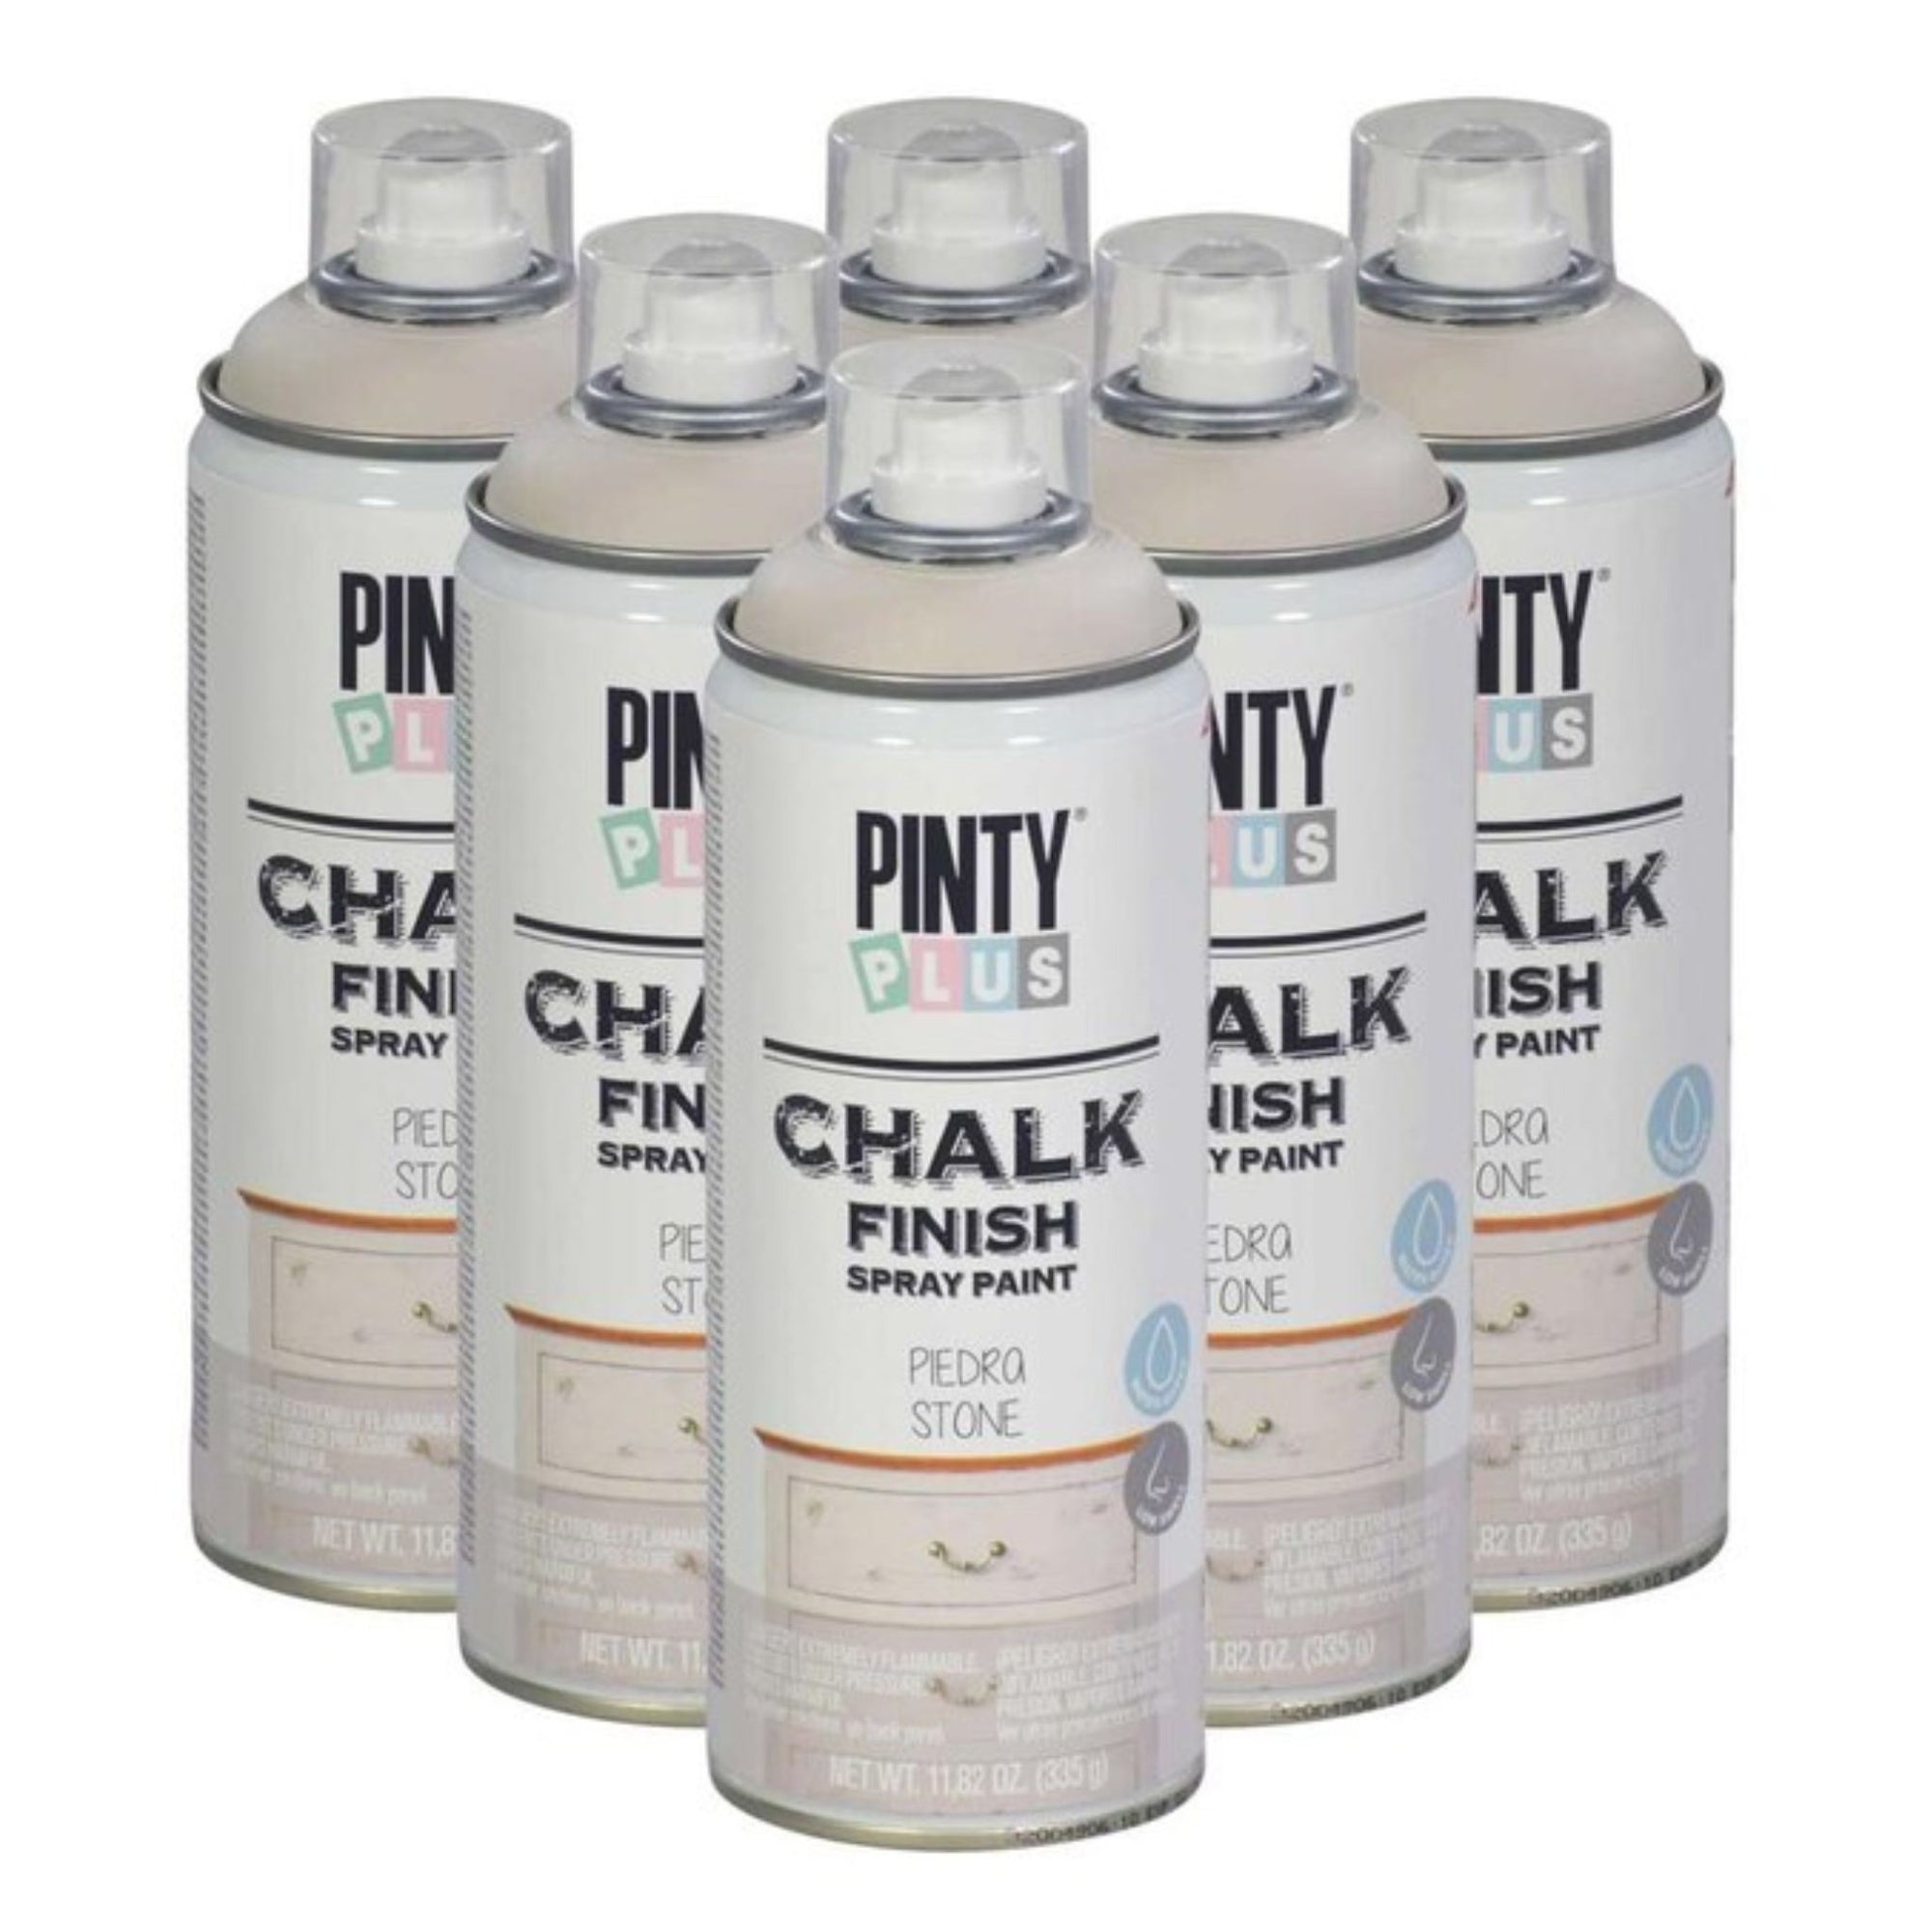 Stone Chalk Finish Spray Paint Pintyplus | 6 Cans - South East Clearance Centre